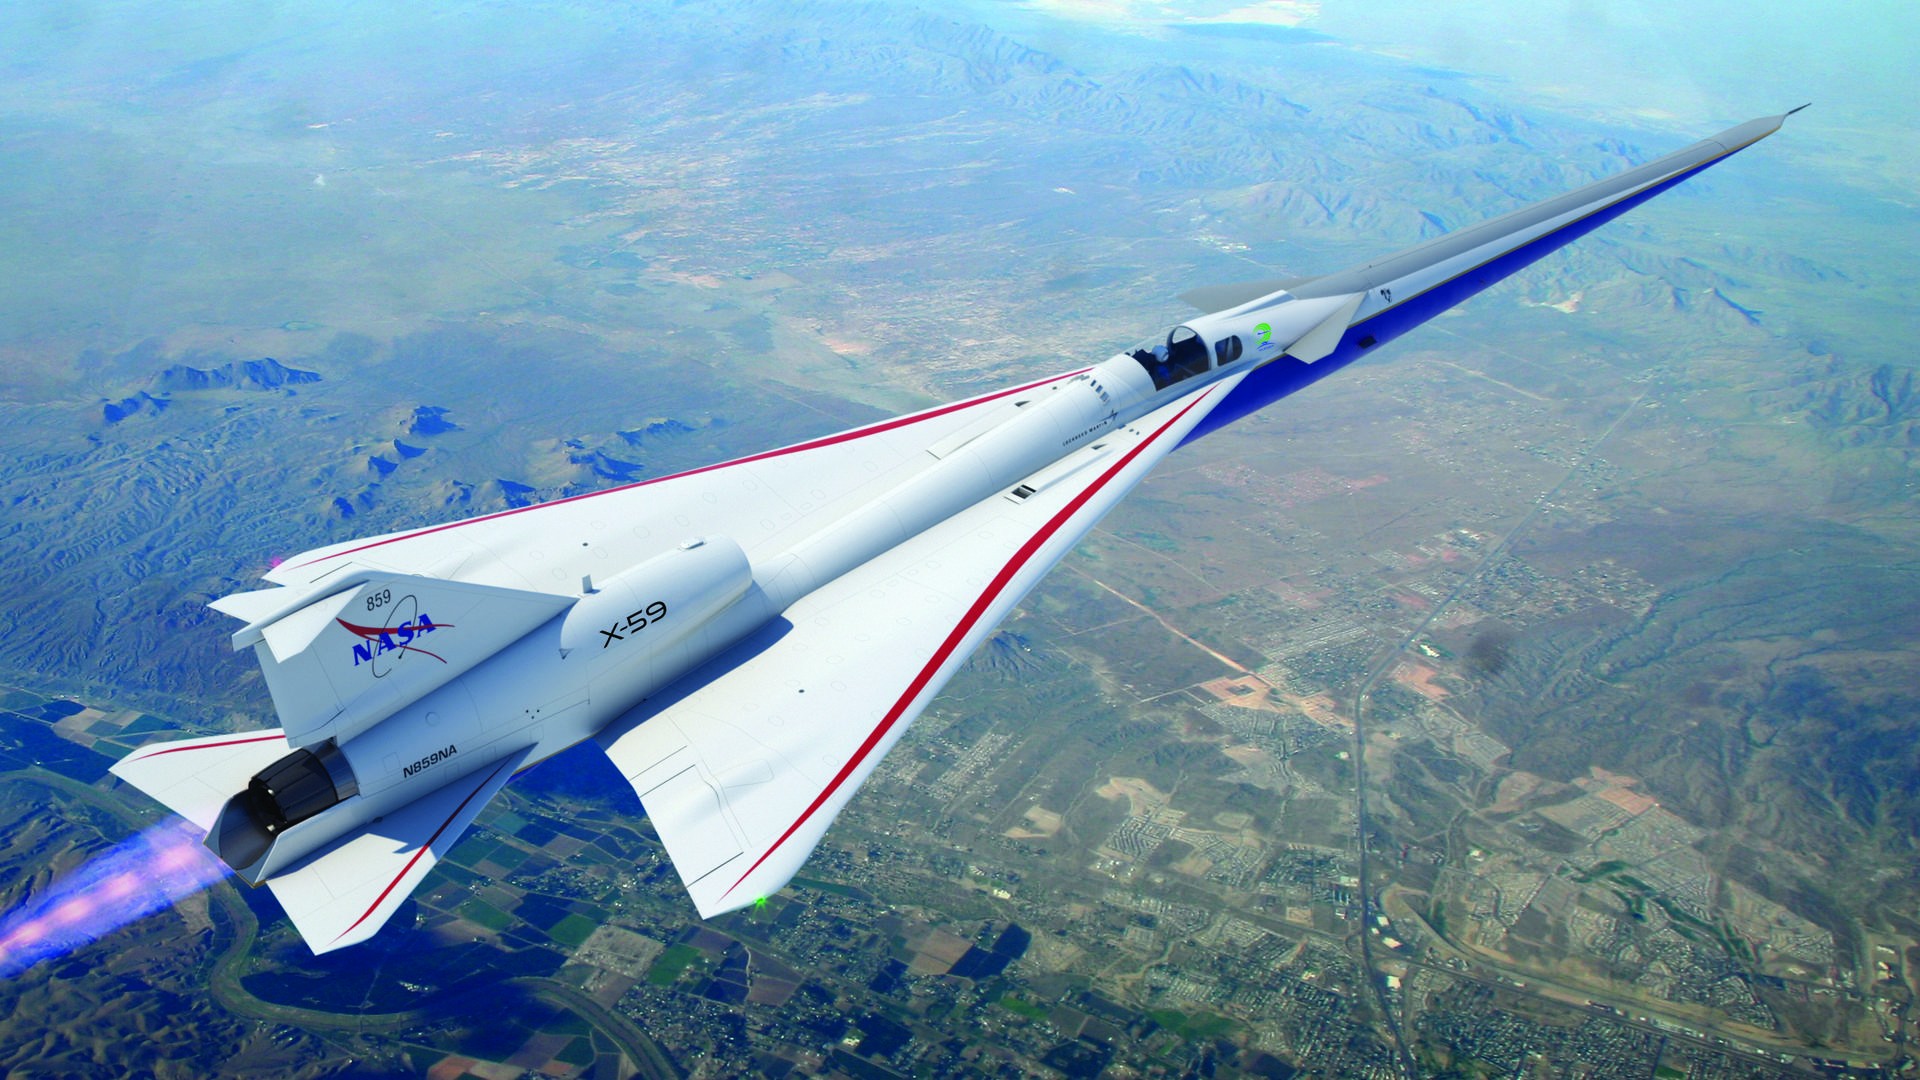 NASA to unveil new X-59 ‘quiet’ supersonic jet on Jan. 12 Space